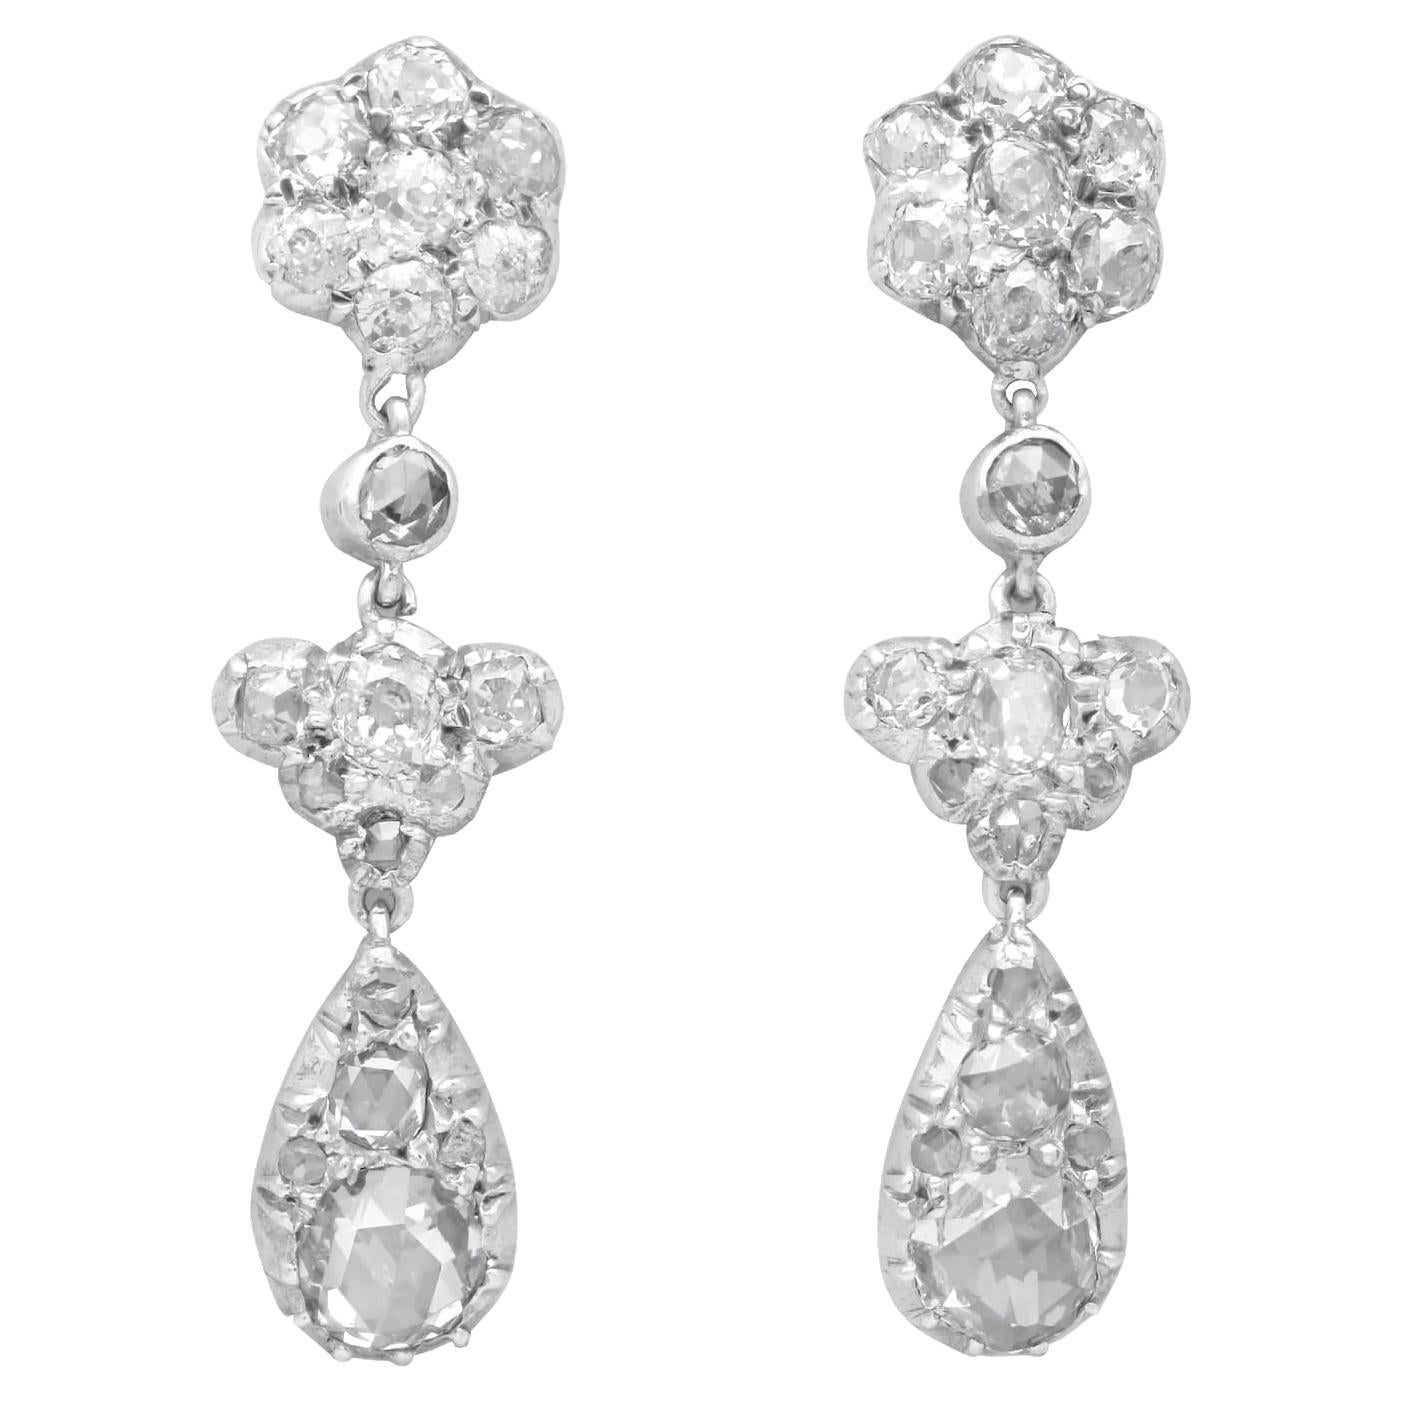 Antique 2.90Ct Diamond and 9k White Gold Drop Earrings Circa 1890